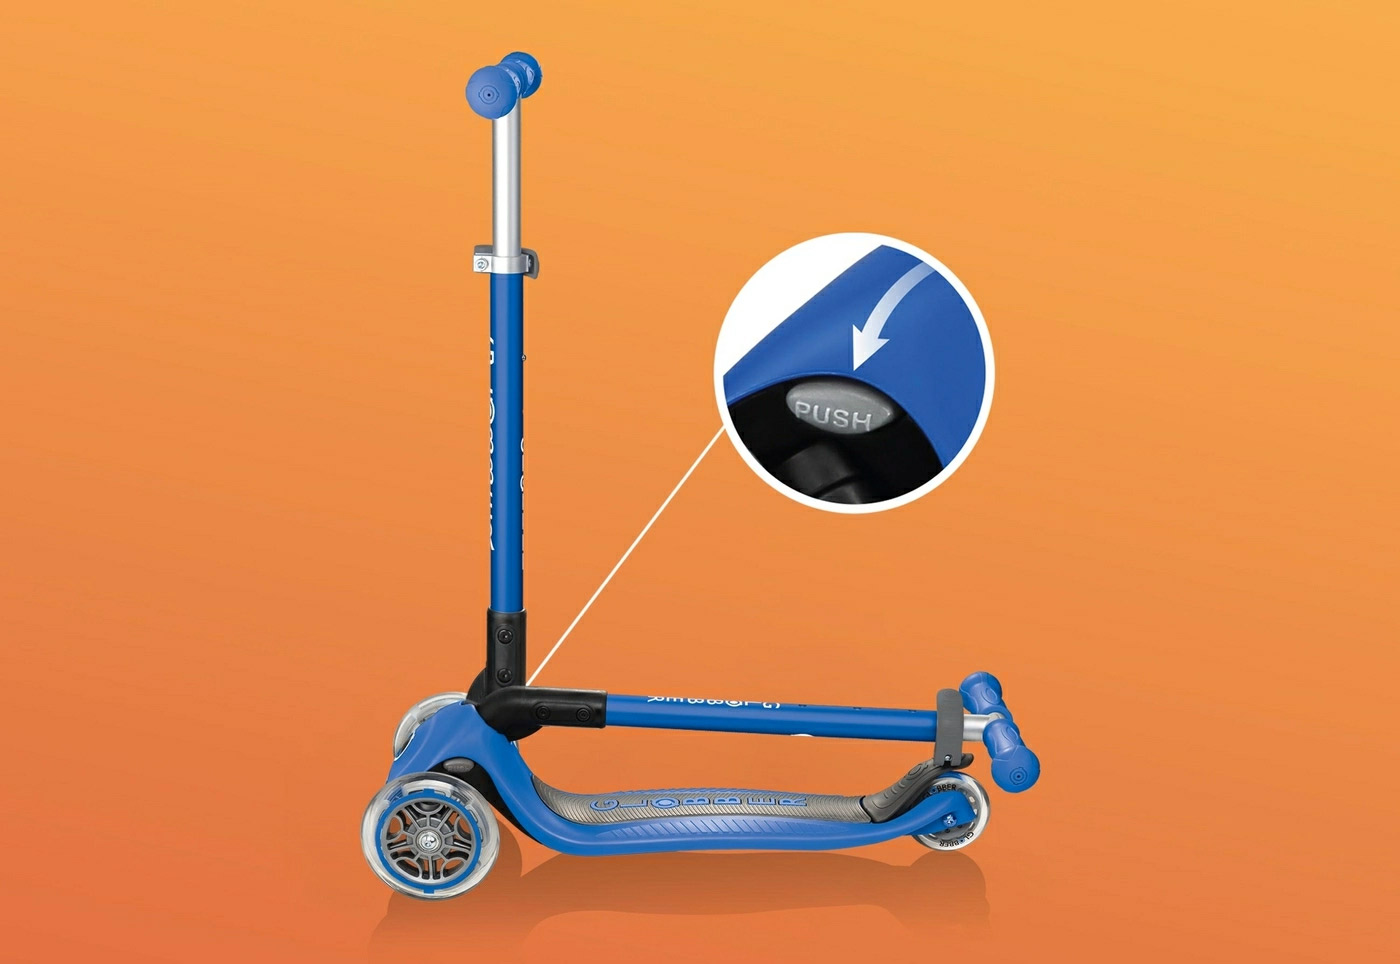 Globber - PRIMO Foldable Scooter